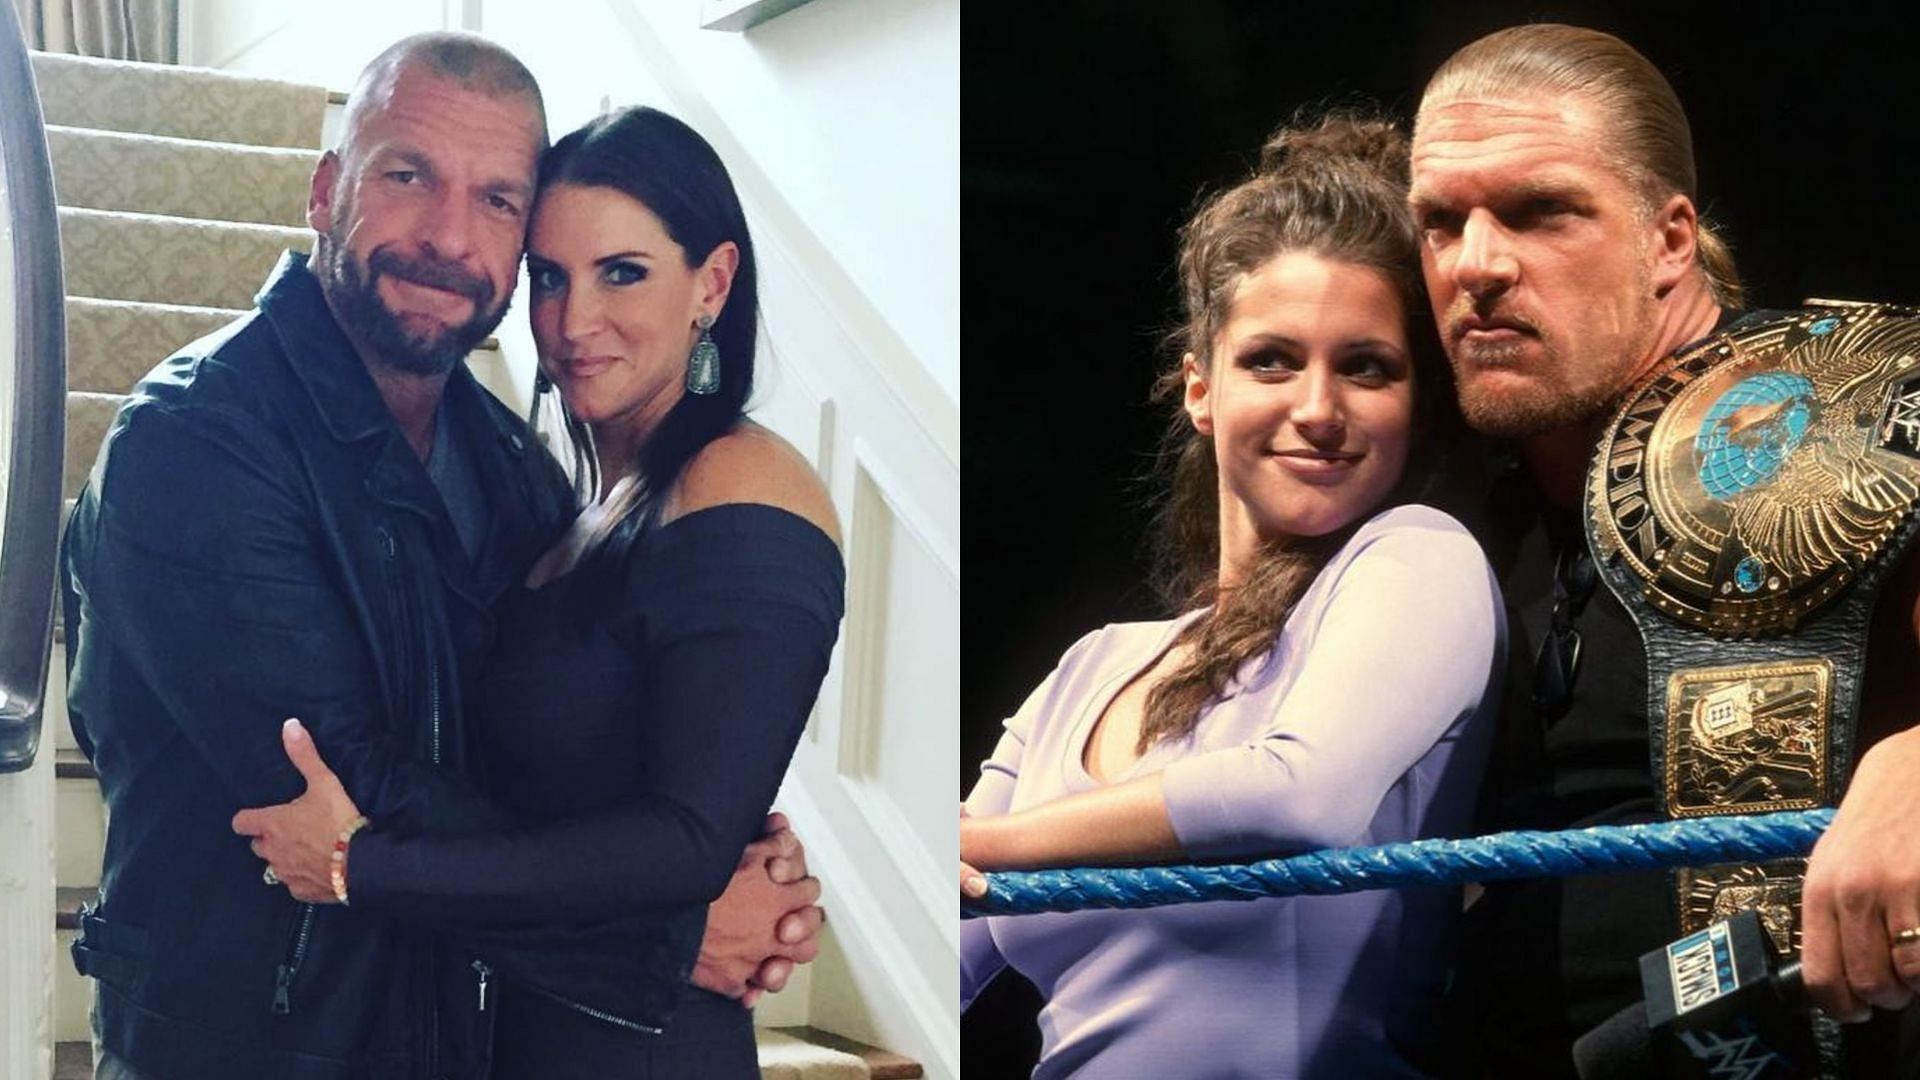 Triple H and Stephanie McMahon have been married for nearly two decades